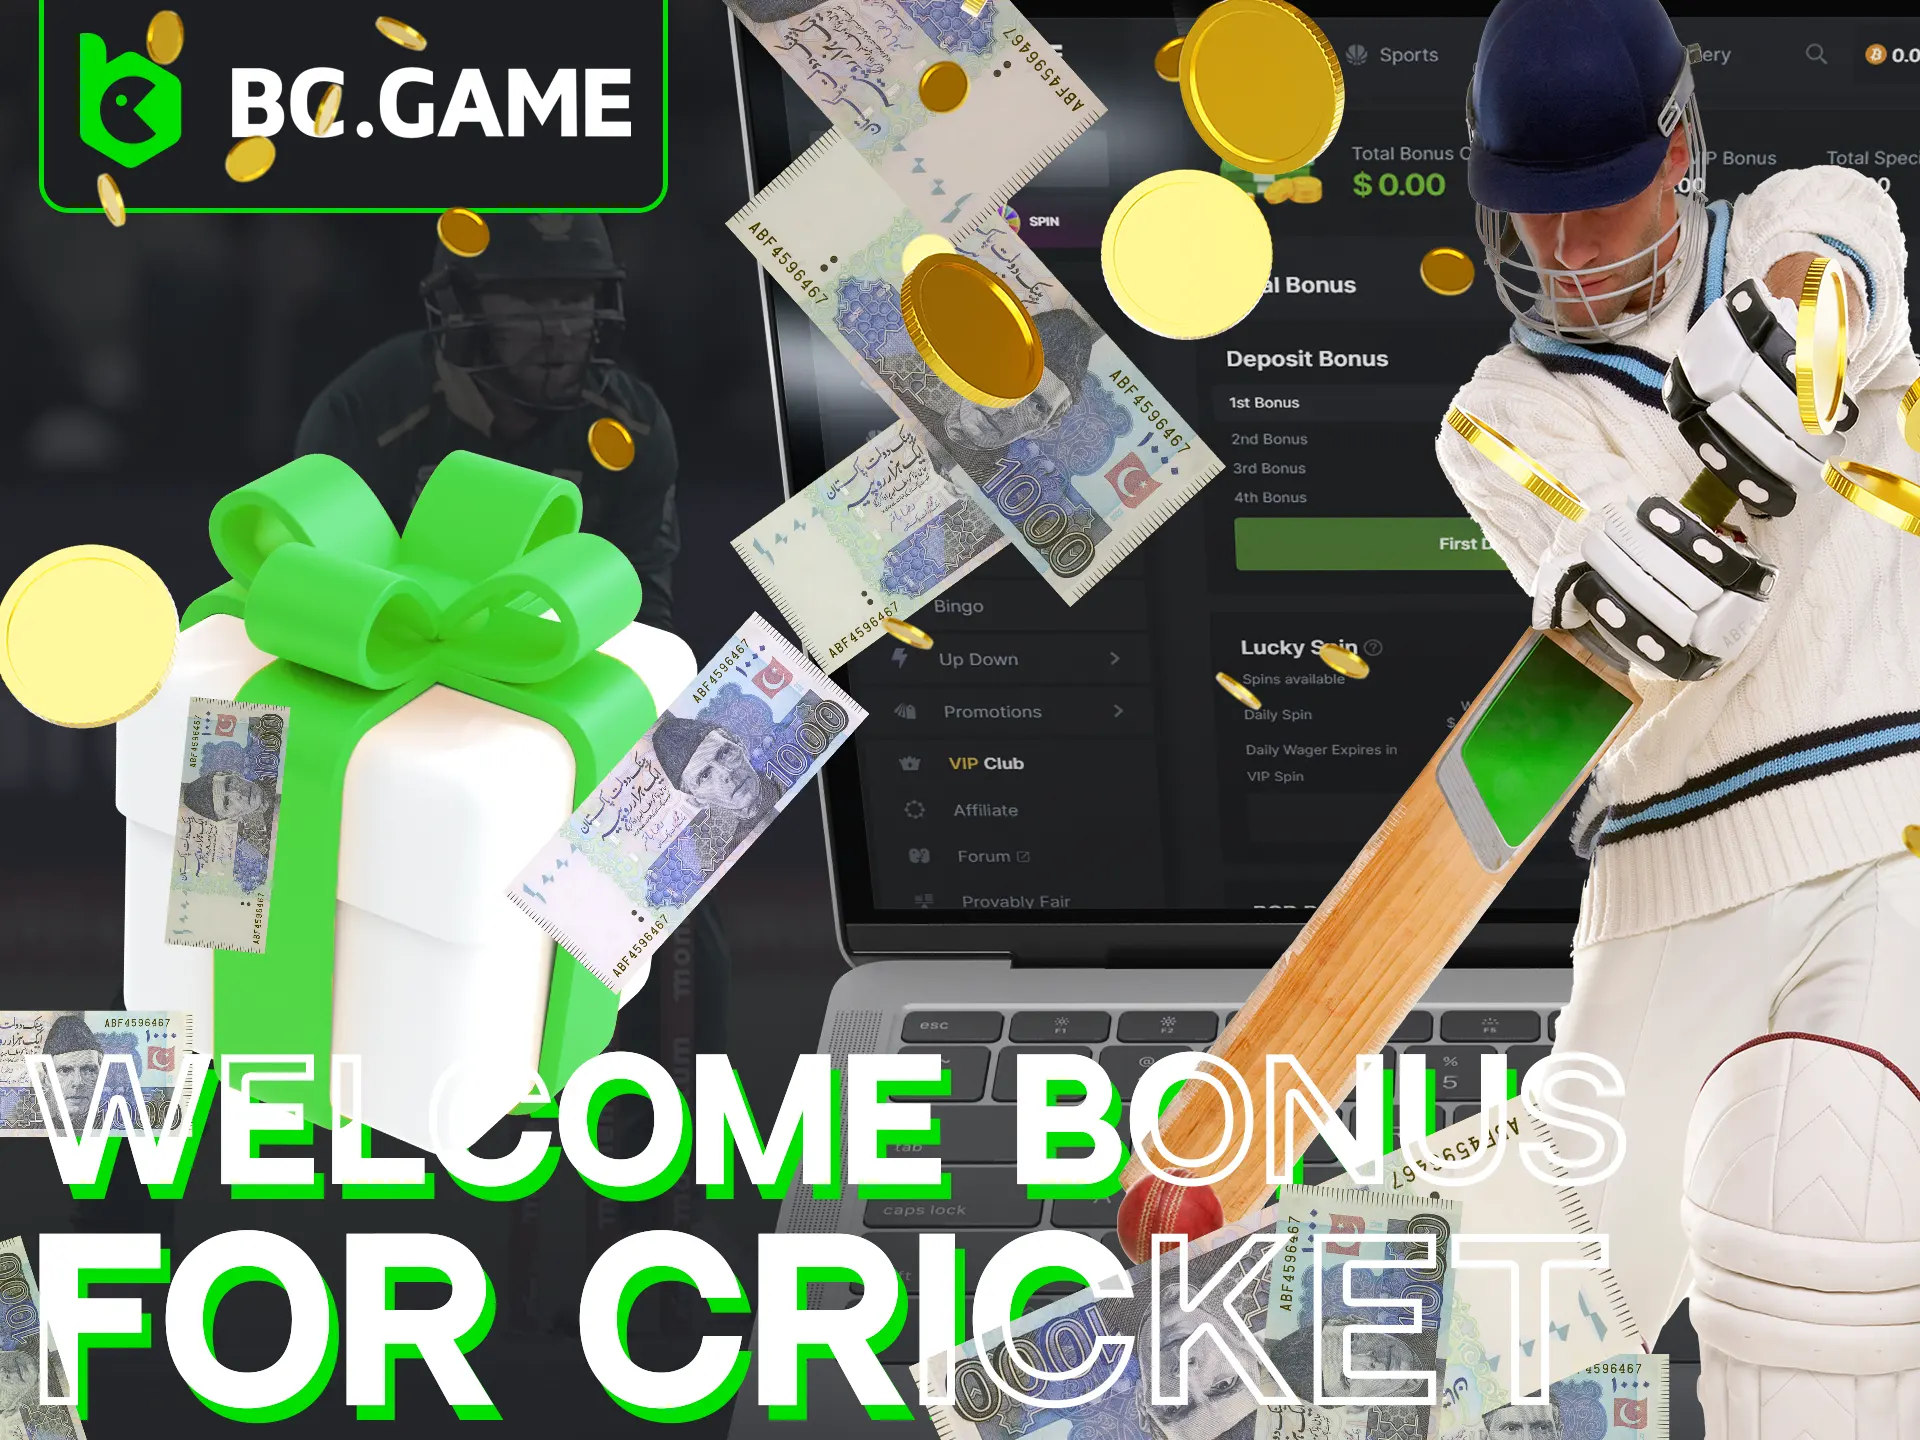 BC Game offers big bonuses for cricket betting.